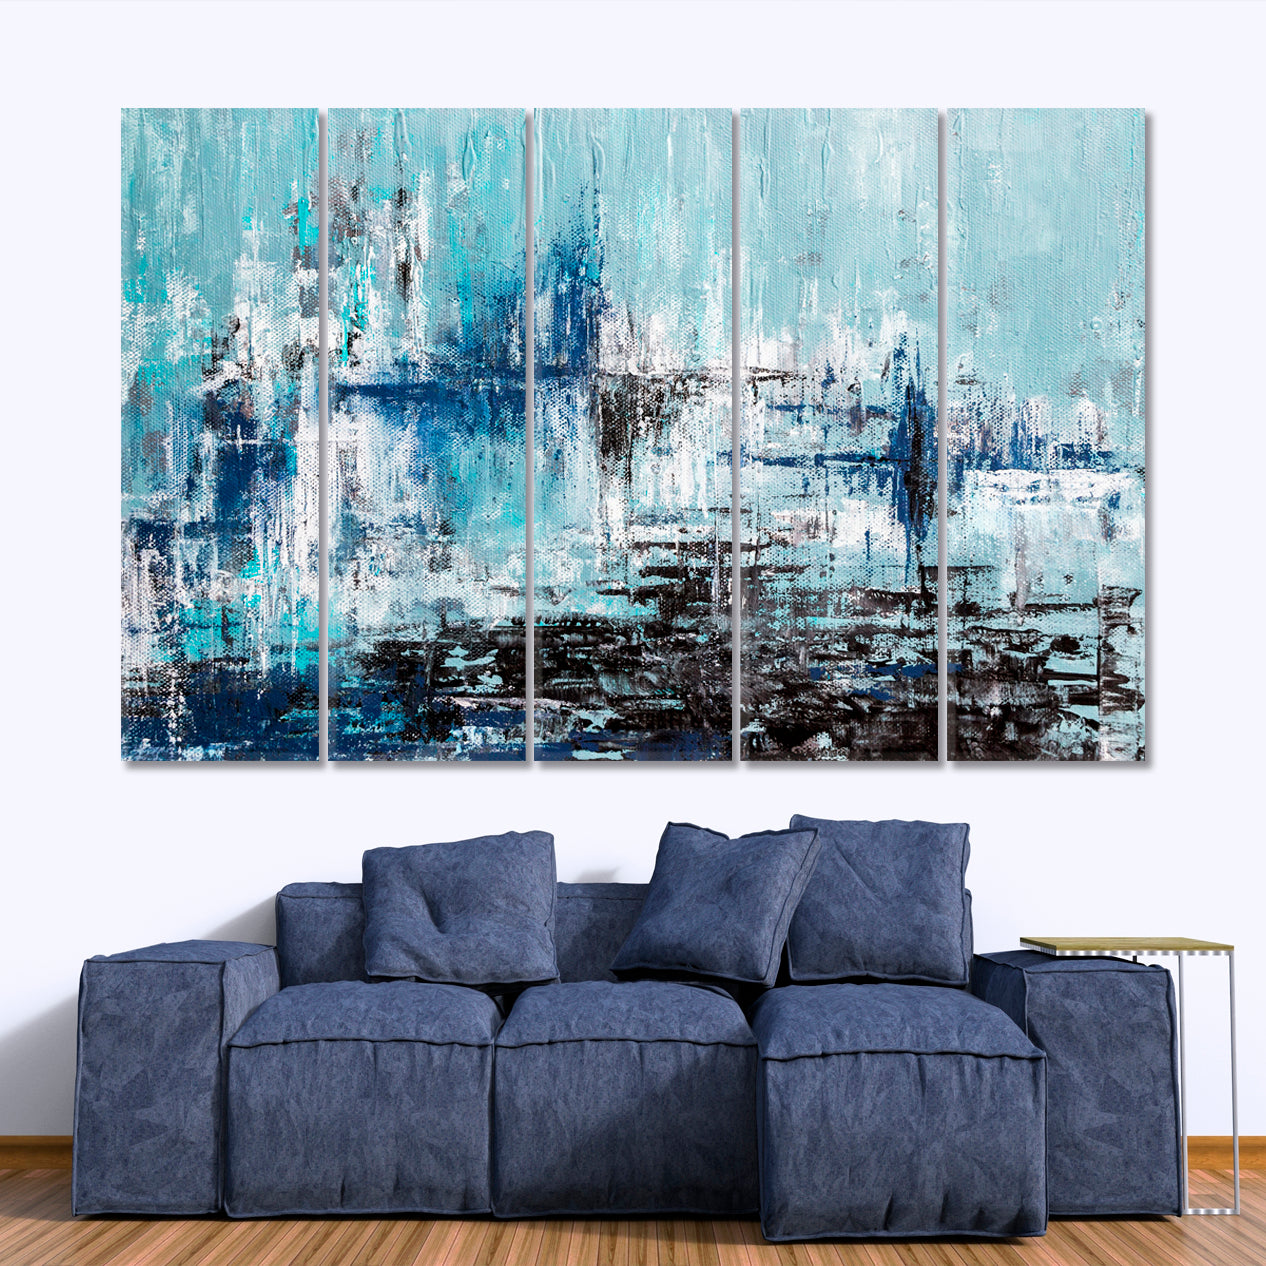 GRUNGE Modern Blue Abstract Acrylic Brush Stroke Painting Abstract Art Print Artesty 5 panels 36" x 24" 